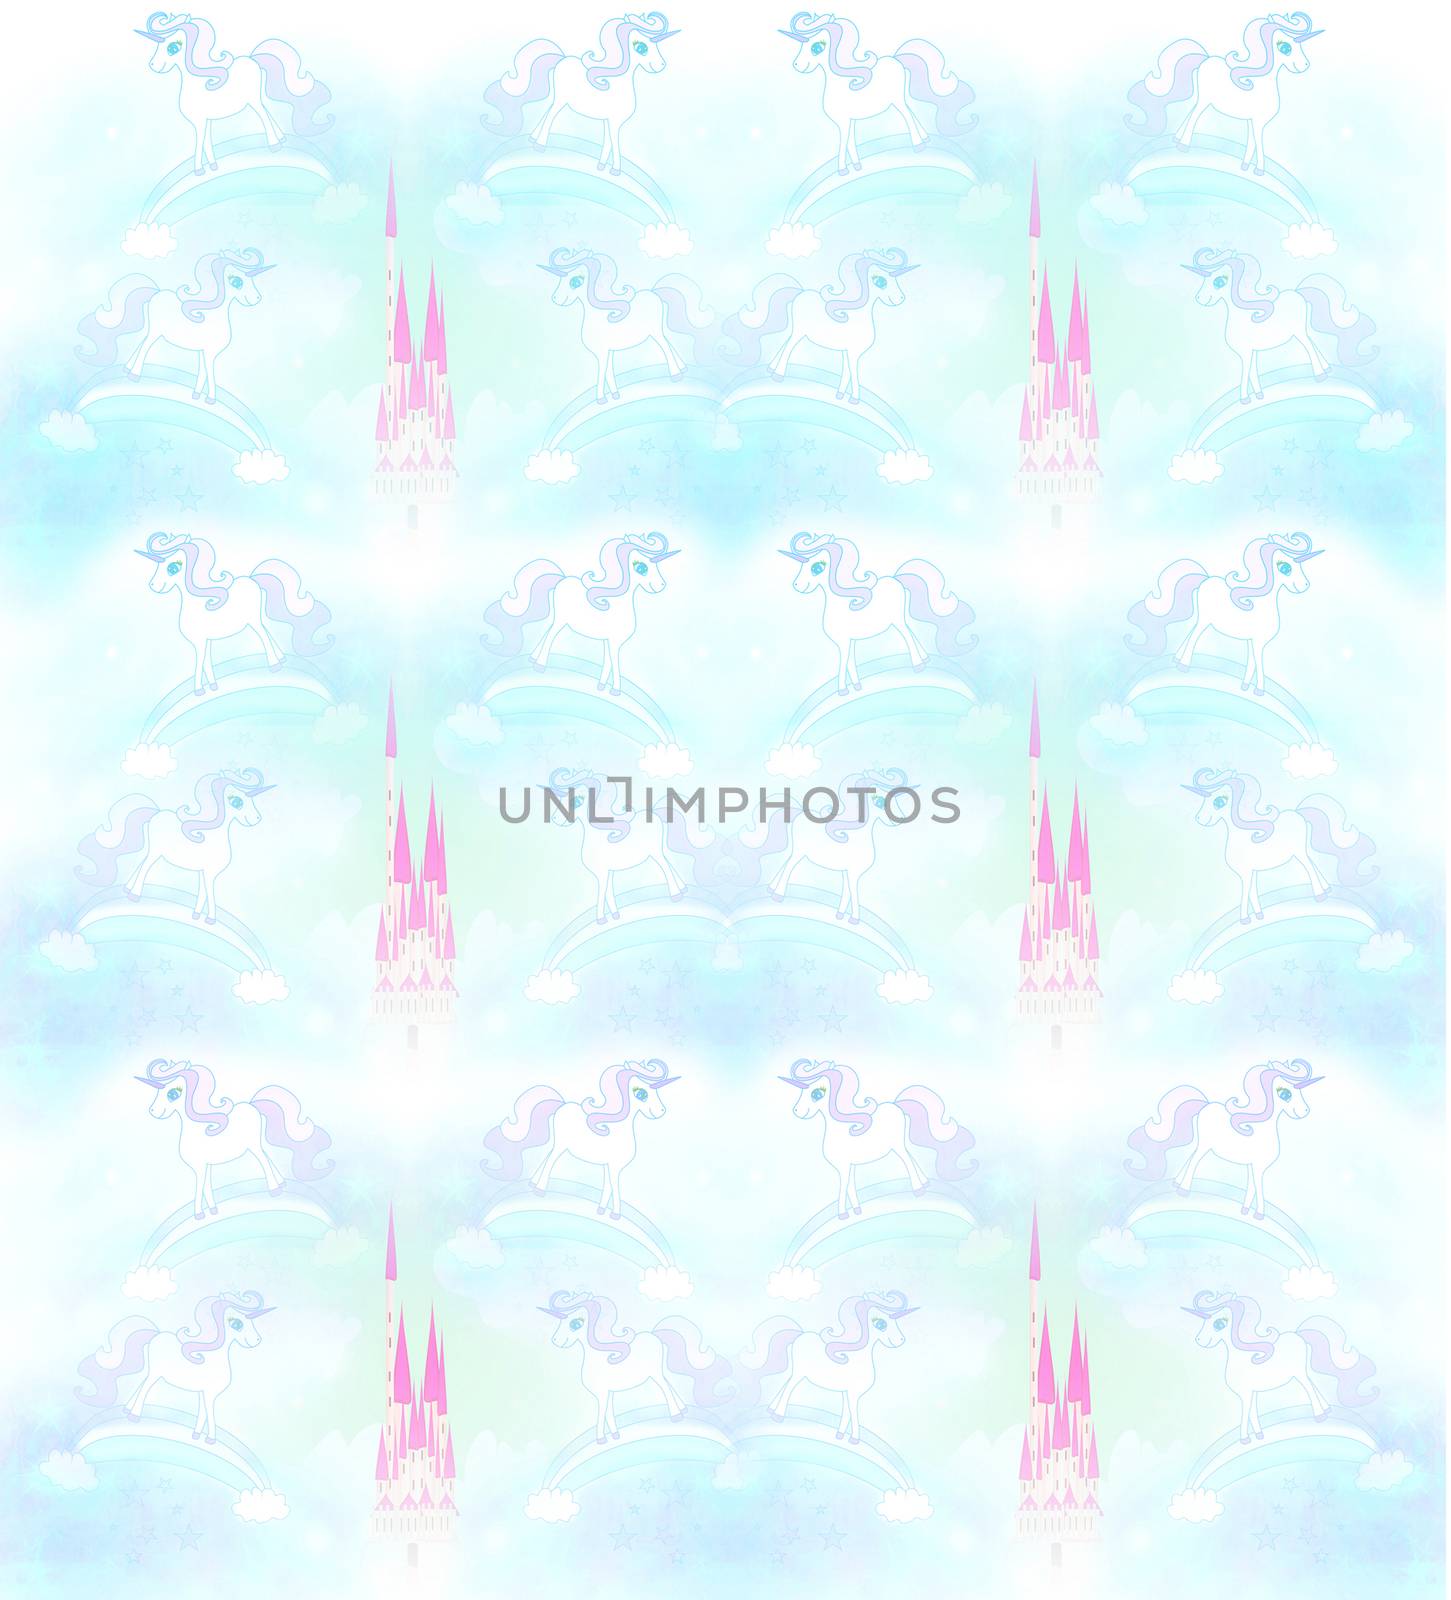 pastel pattern with unicorns and castles by JackyBrown